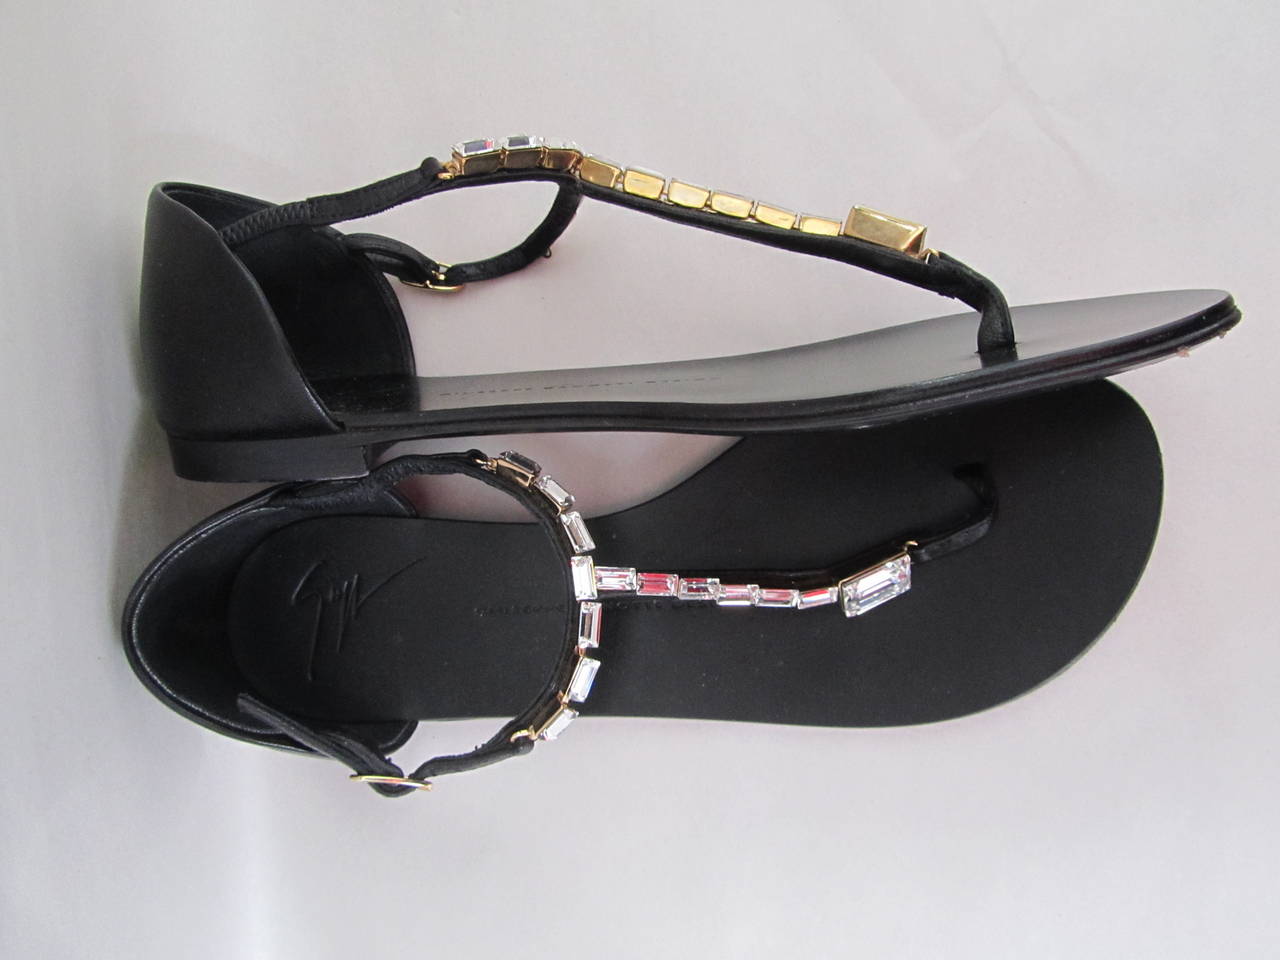 Giuseppe Zanotti strap sandals. Black sandals encrusted with gorgeous rhinestones. Remarkable sandals that are good for both informal and formal occasions. Slight wear on the bottom from a couple of fittings, but otherwise excellent condition.